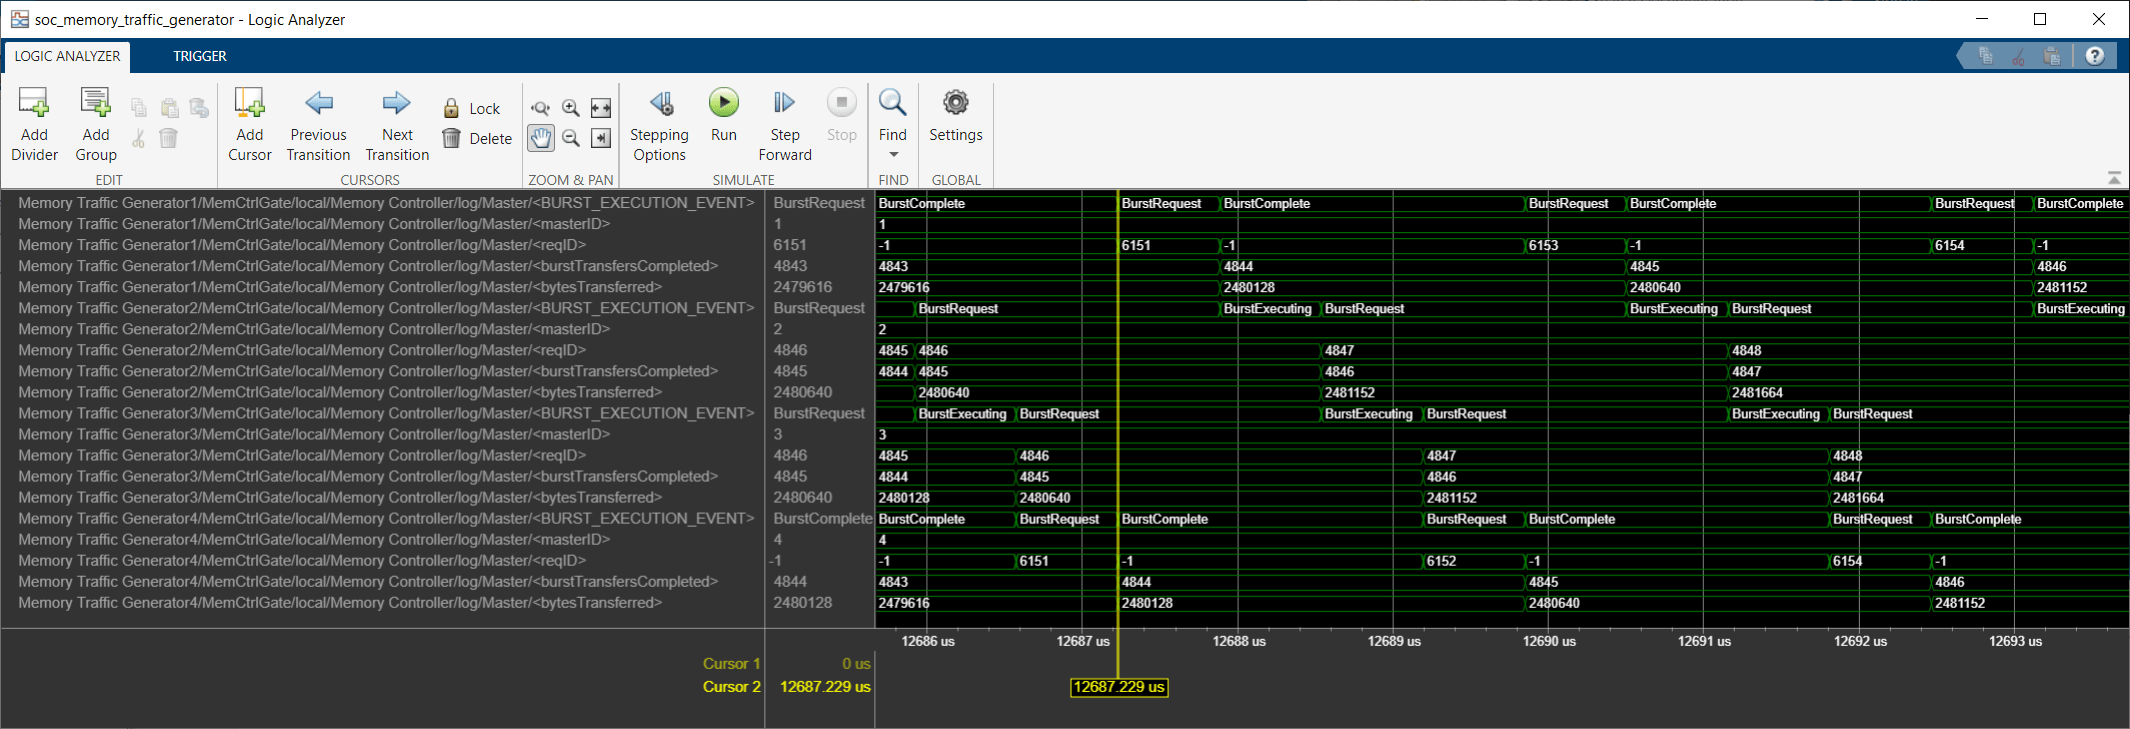 Logic Analyzer displaying waveforms of four Traffic Generator blocks, with the "Show Memory Controller Ports" parameter selected. For each Traffic Generator, the analyzer shows waves for BURST_EXECUTION_EVENT, reqID, burstTransferCompleted, bytesTransferred, and masterID.